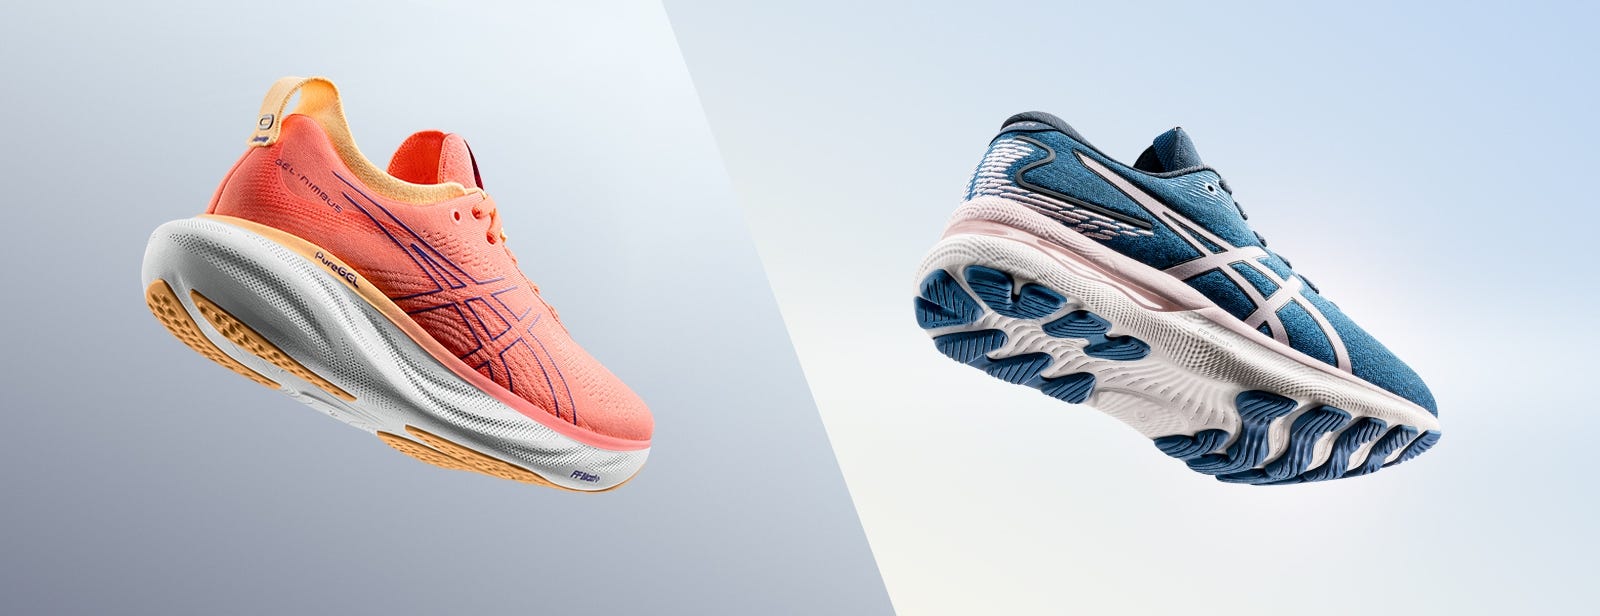 What’s the difference between the GEL-NIMBUS 25 and GEL-NIMBUS 24 running shoes?